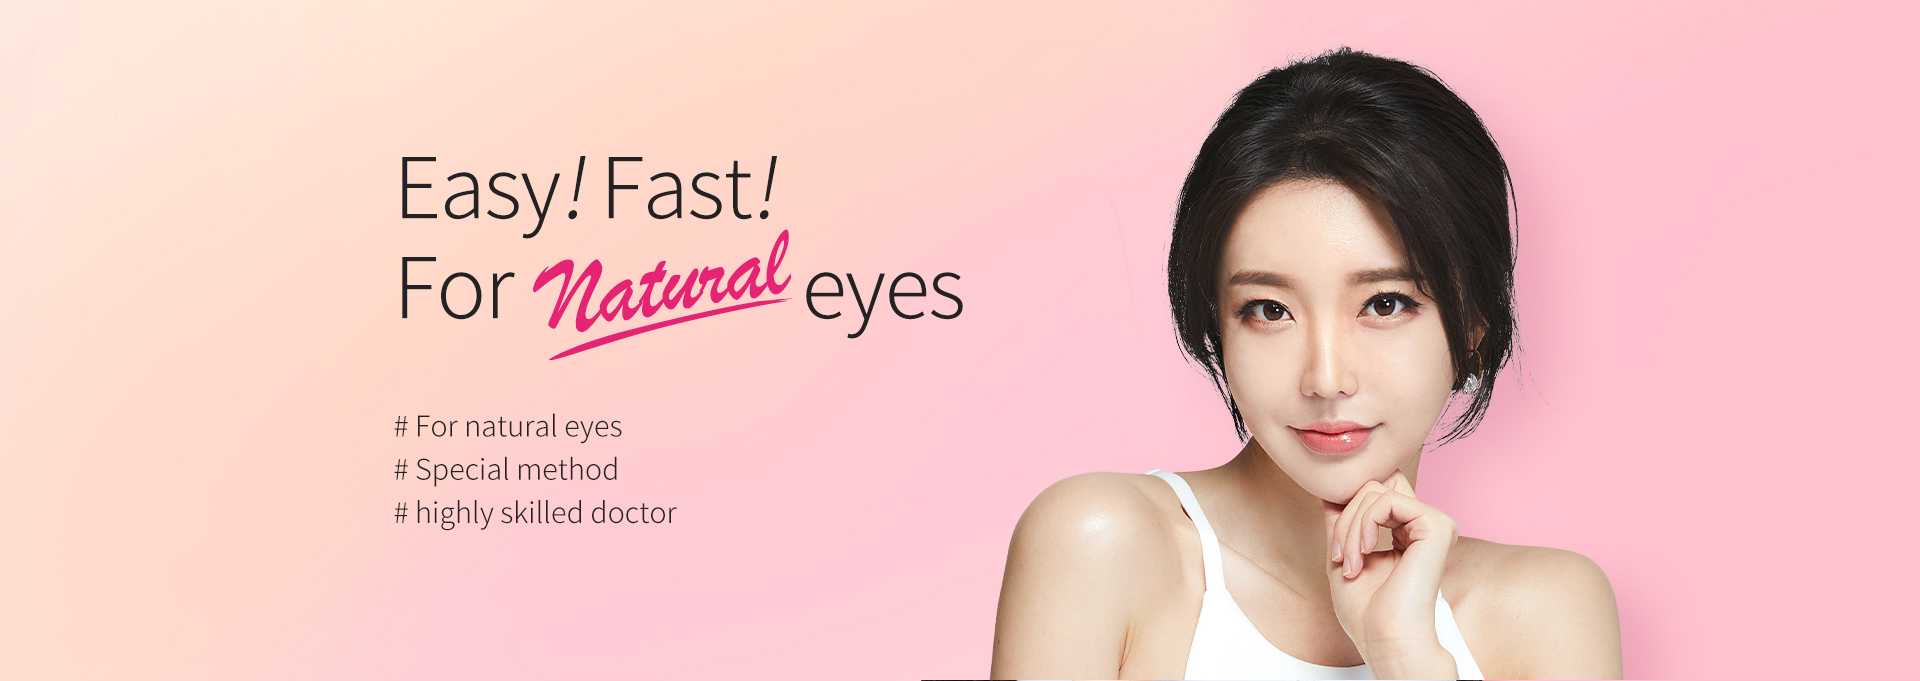 Easy! fast! For natural eyes